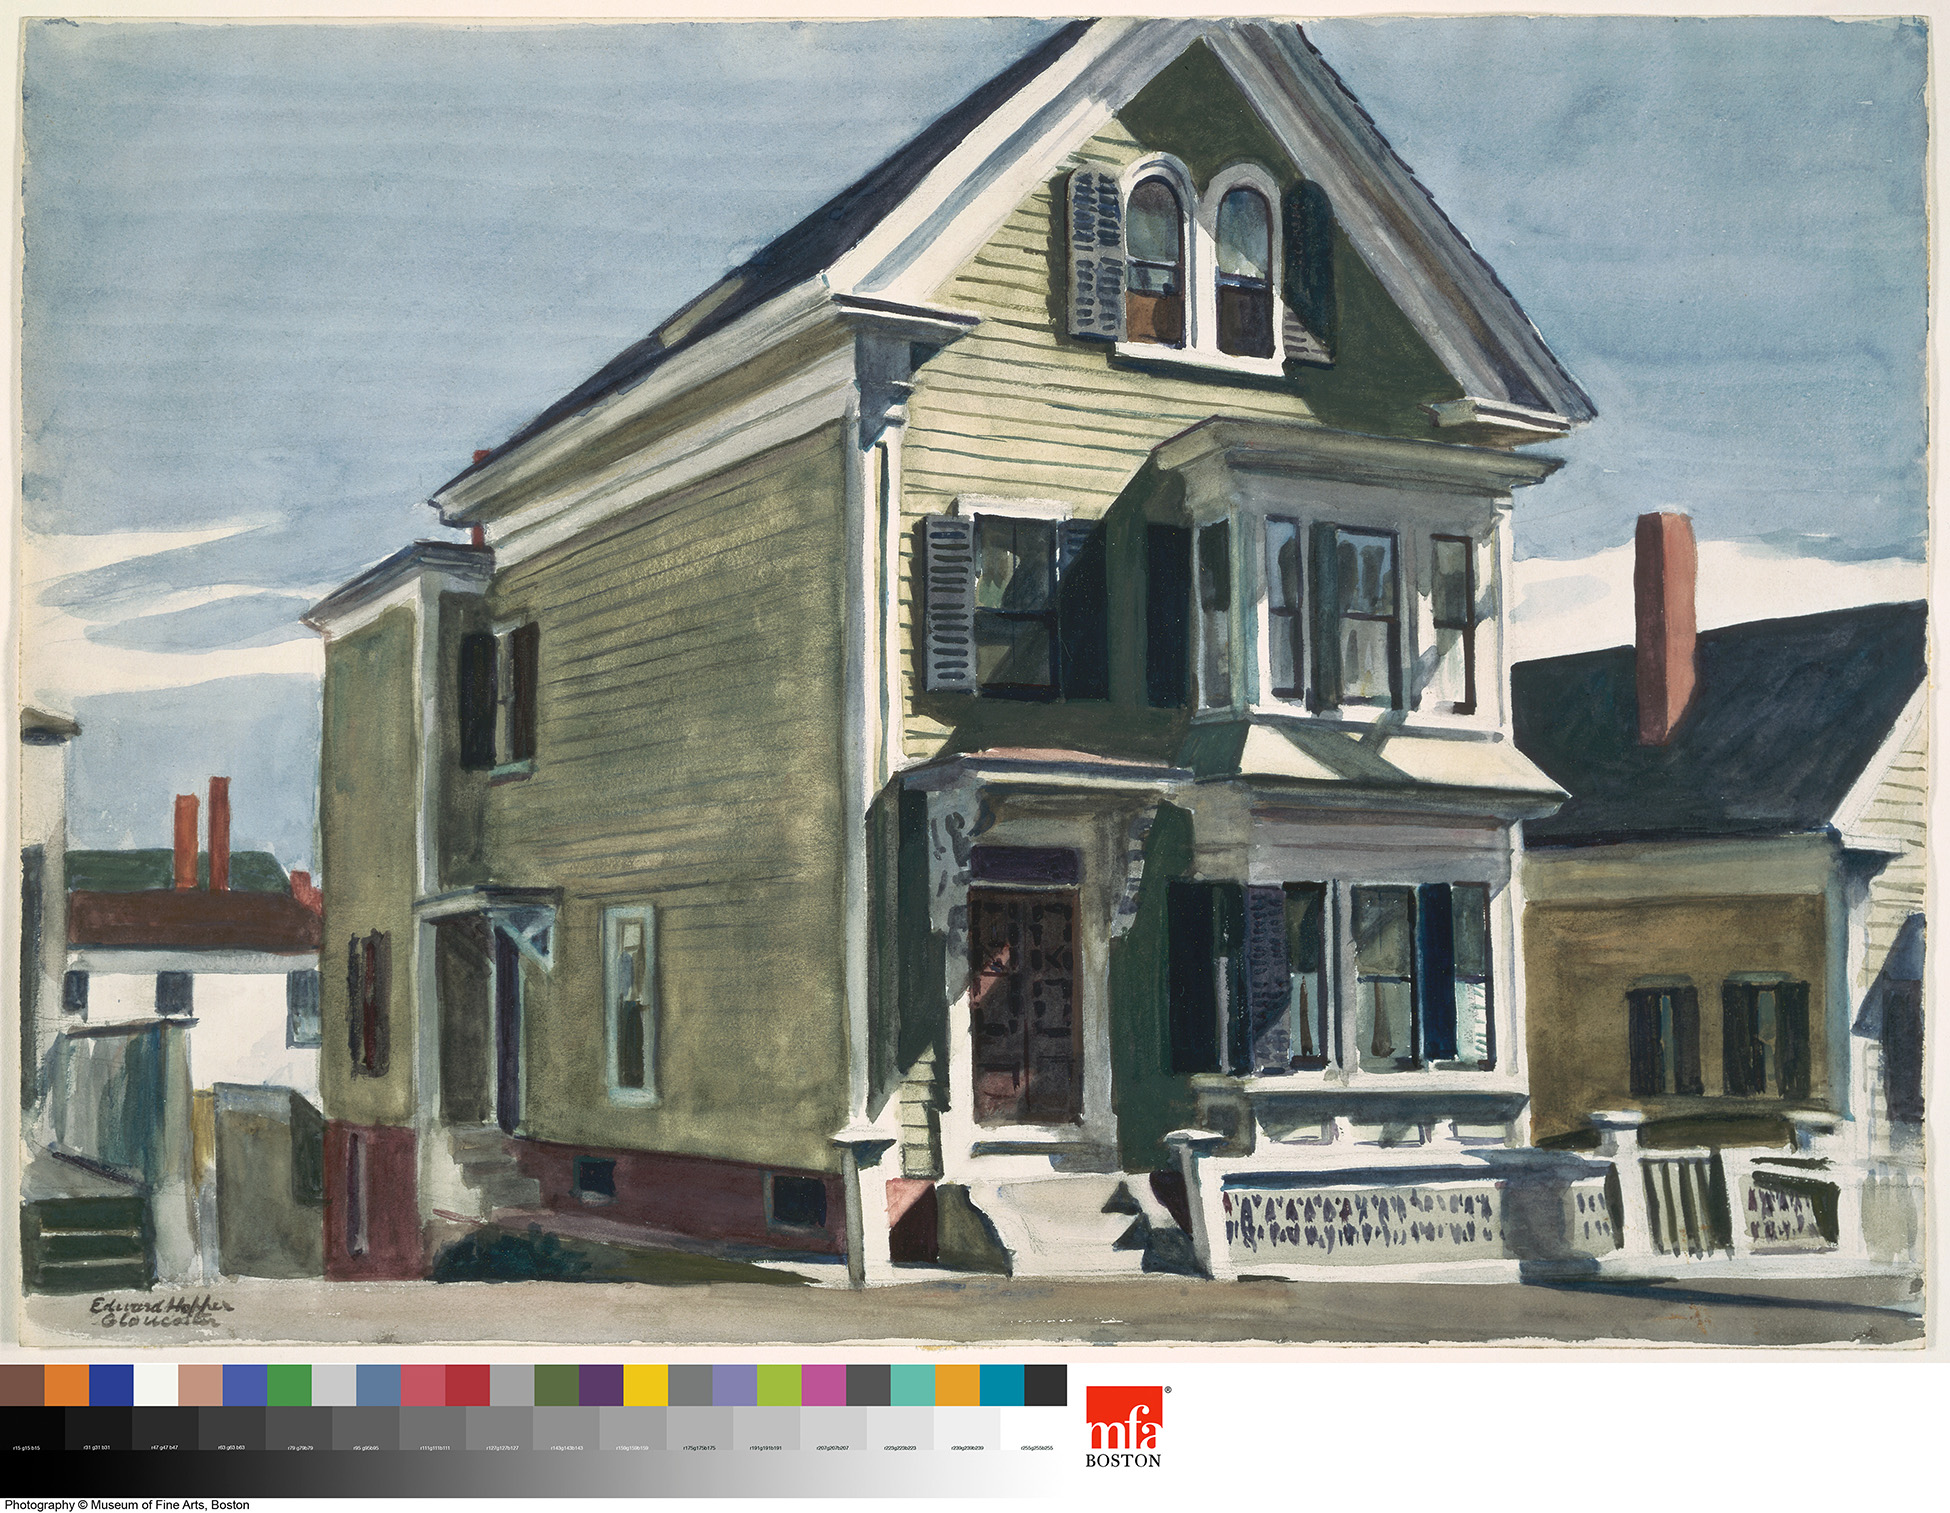 Anderson’s House, 1926
Watercolor over graphite pencil on paper, 13 15/16 x 19 15/16 in. (35.4 x 50.7 cm) Museum of Fine Arts, Boston
Bequest of John T. Spaulding, 48.720
Photograph © 2023, Museum of Fine Arts, Boston
© 2023 Heirs of Josephine N. Hopper / Licensed by Artists Rights Society (ARS), NY